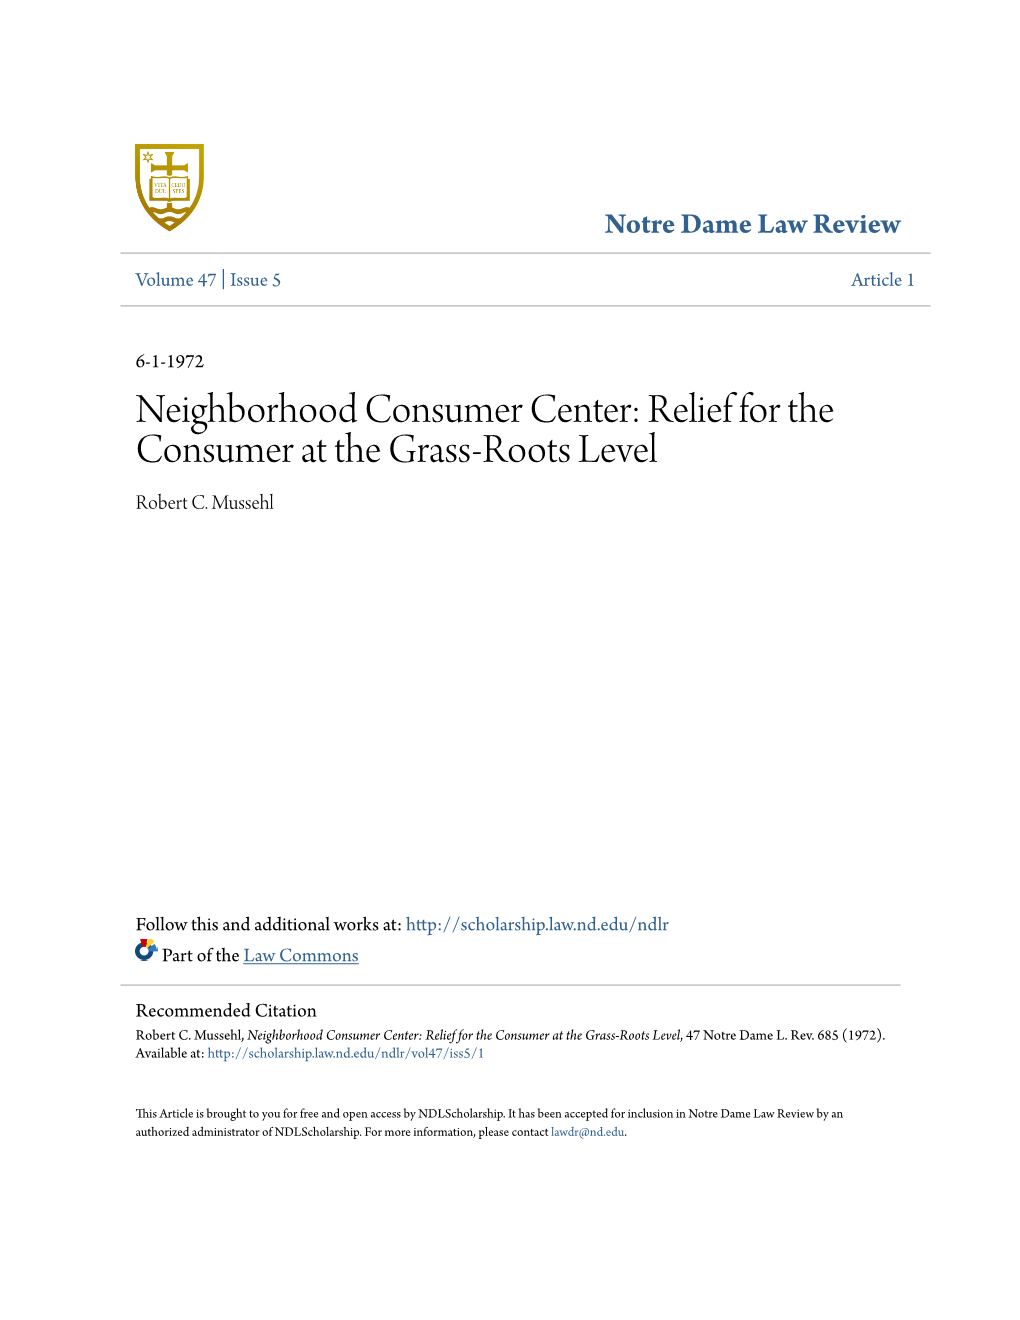 Neighborhood Consumer Center: Relief for the Consumer at the Grass-Roots Level Robert C